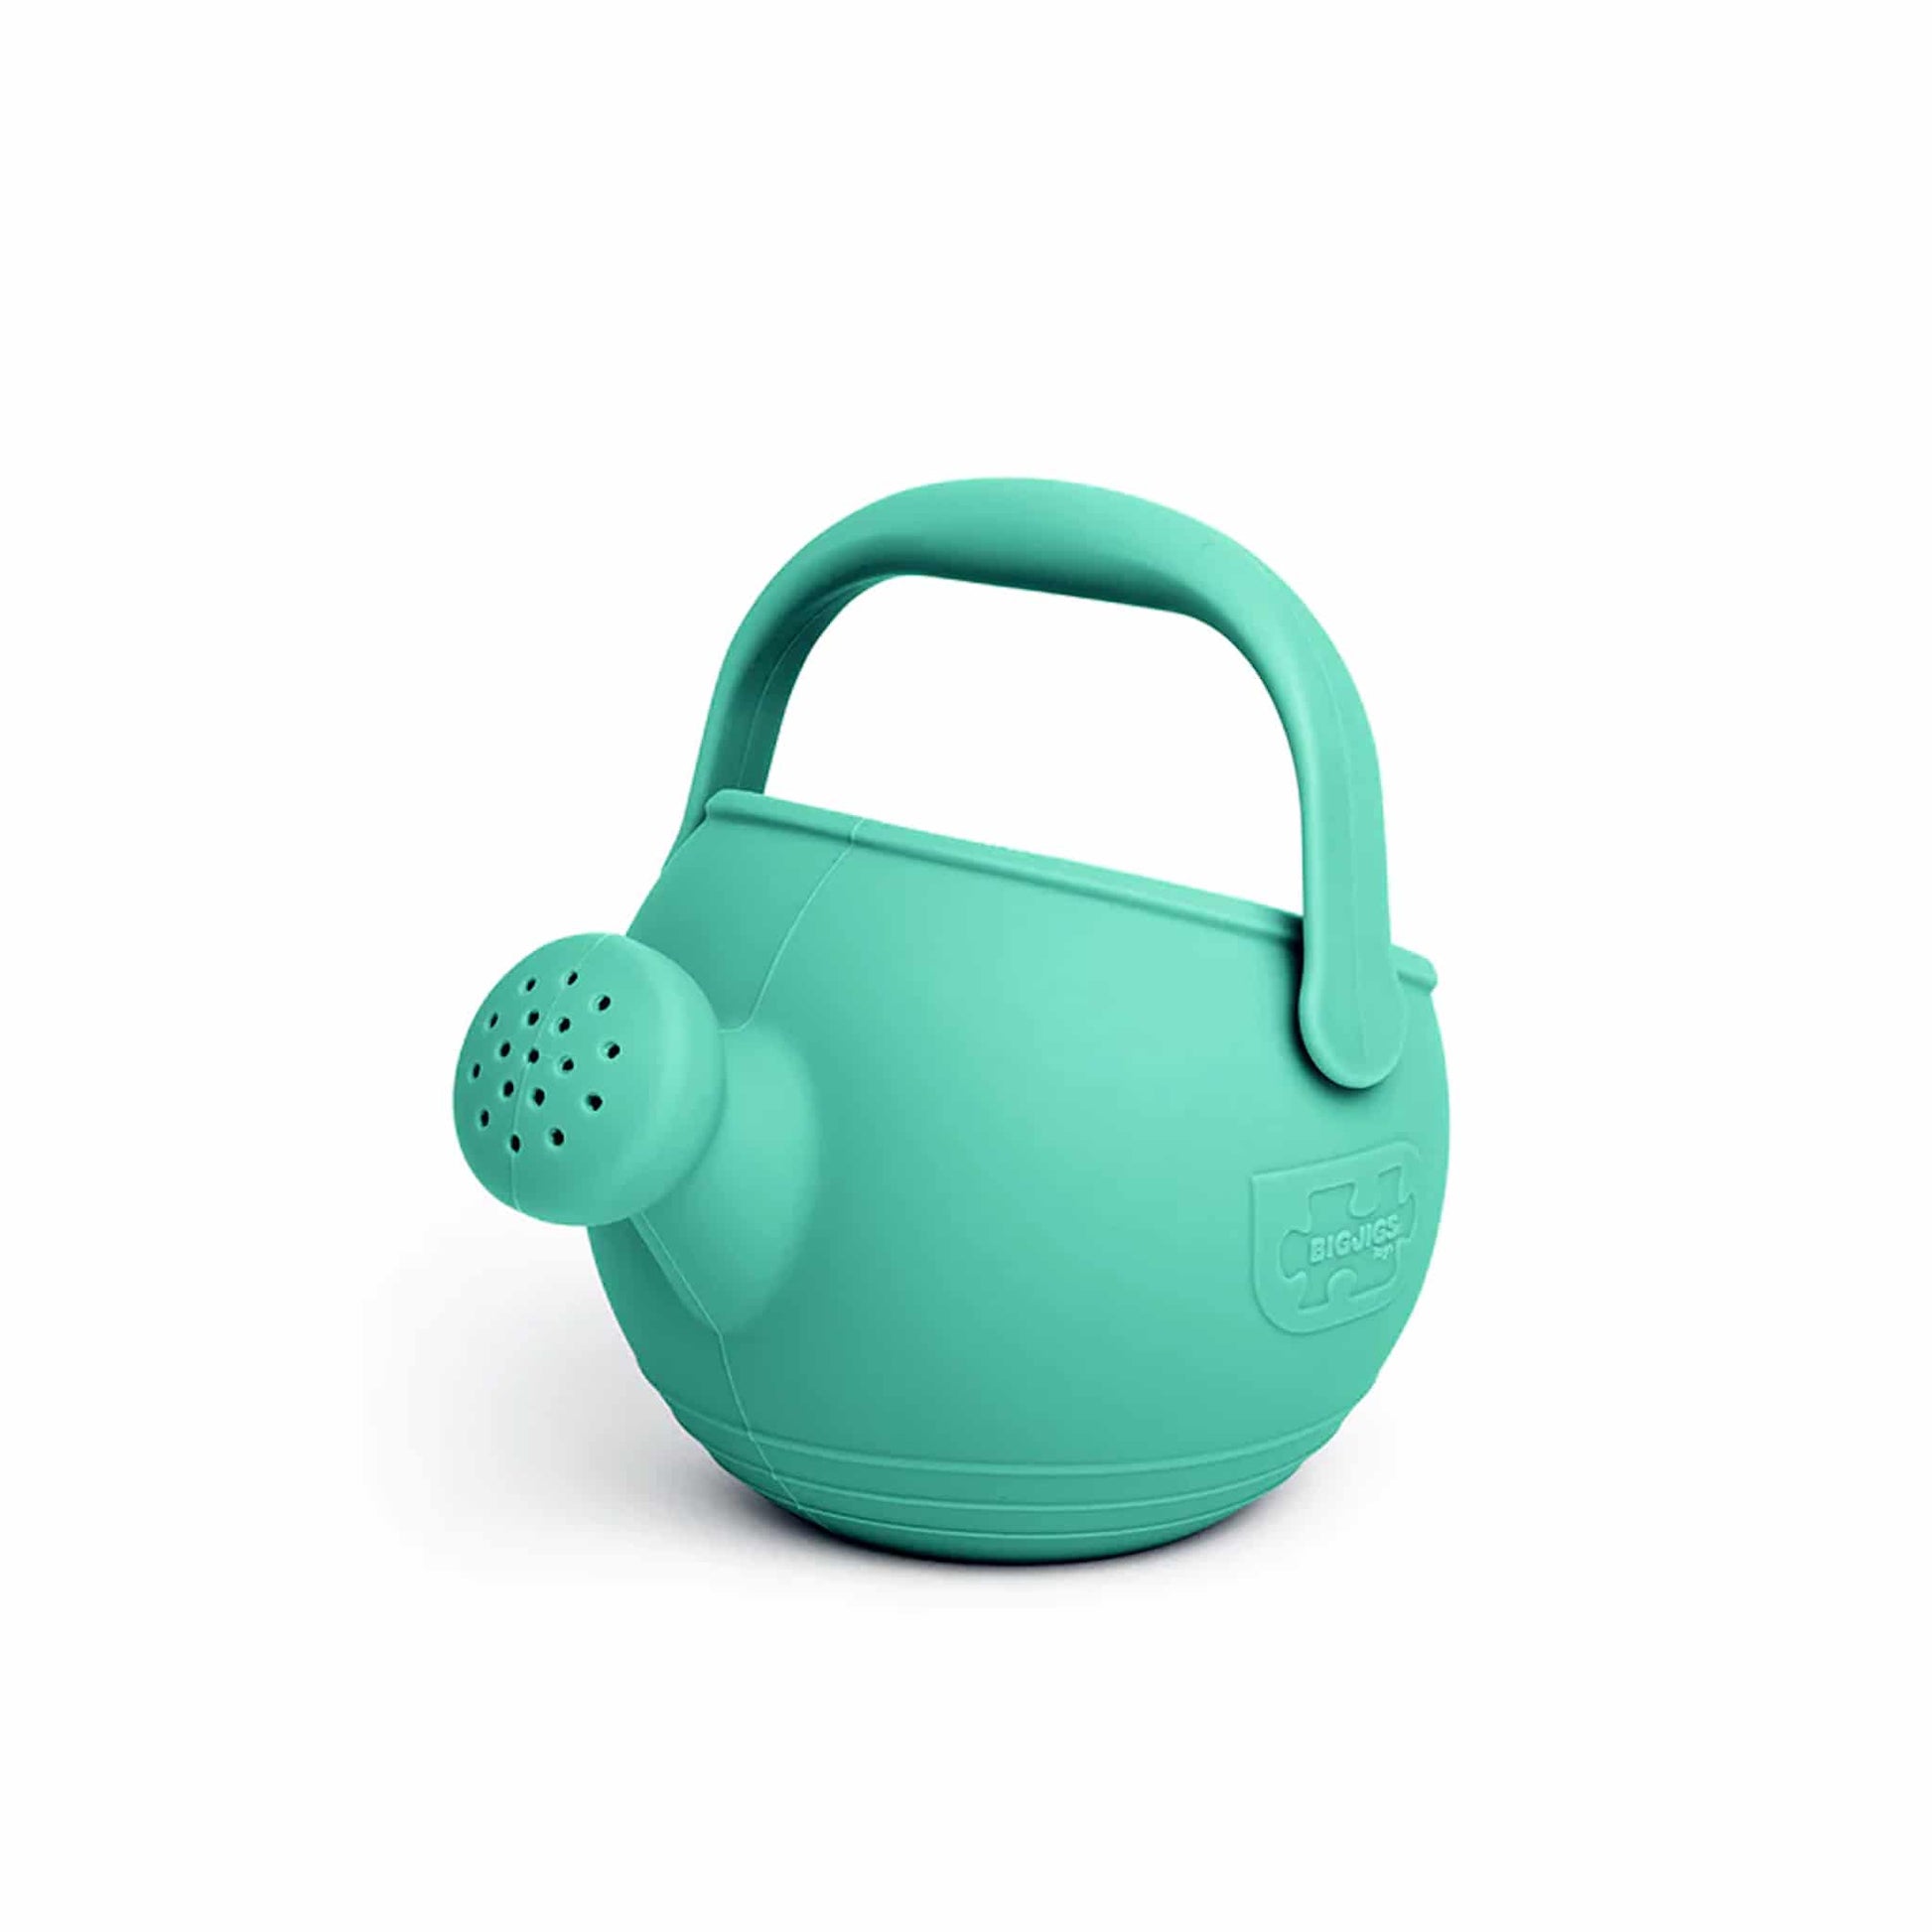 Bigjigs Silicone Watering Can Eggshell Green